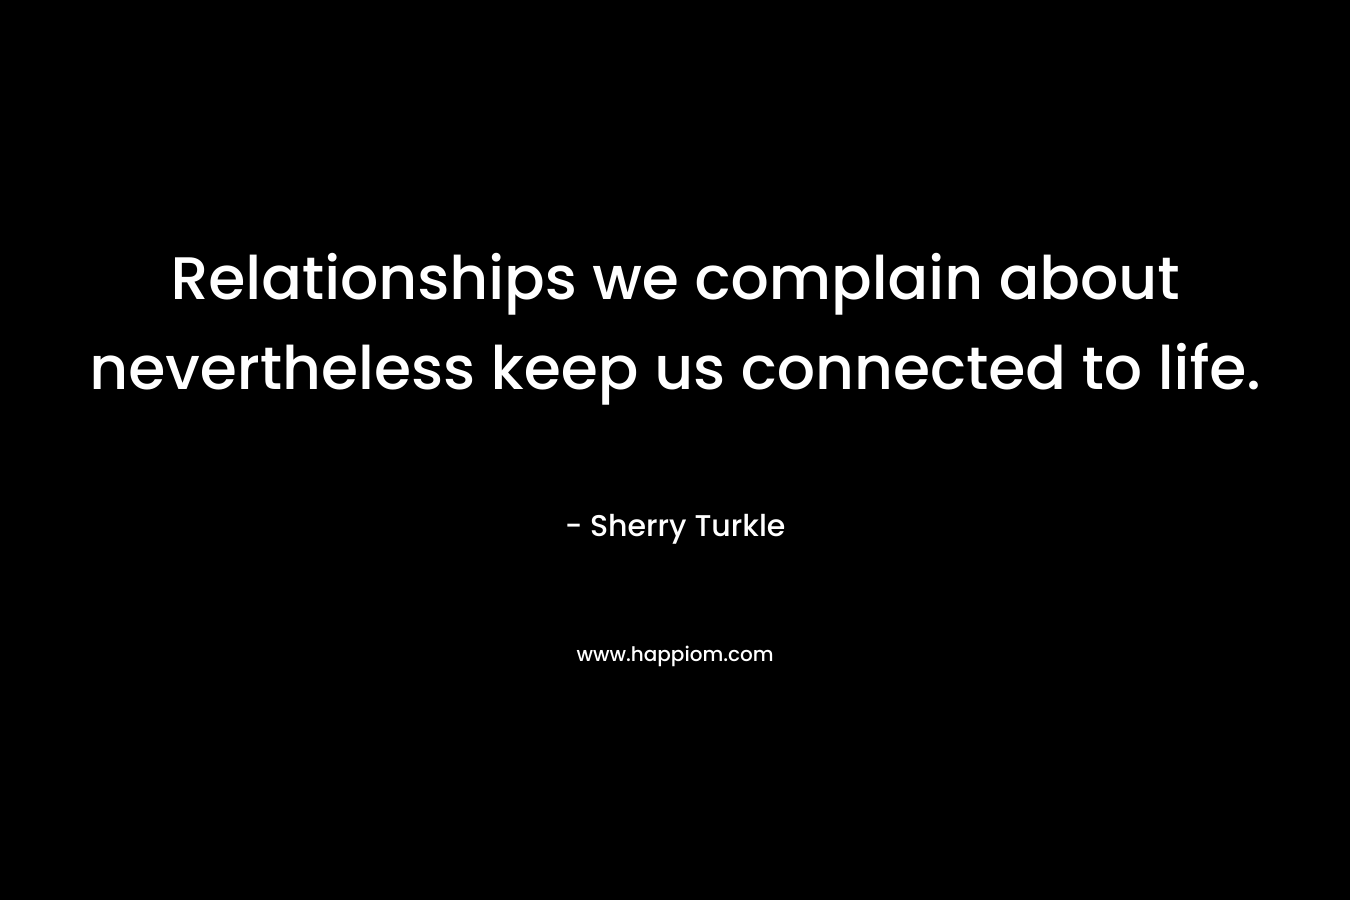 Relationships we complain about nevertheless keep us connected to life. – Sherry Turkle